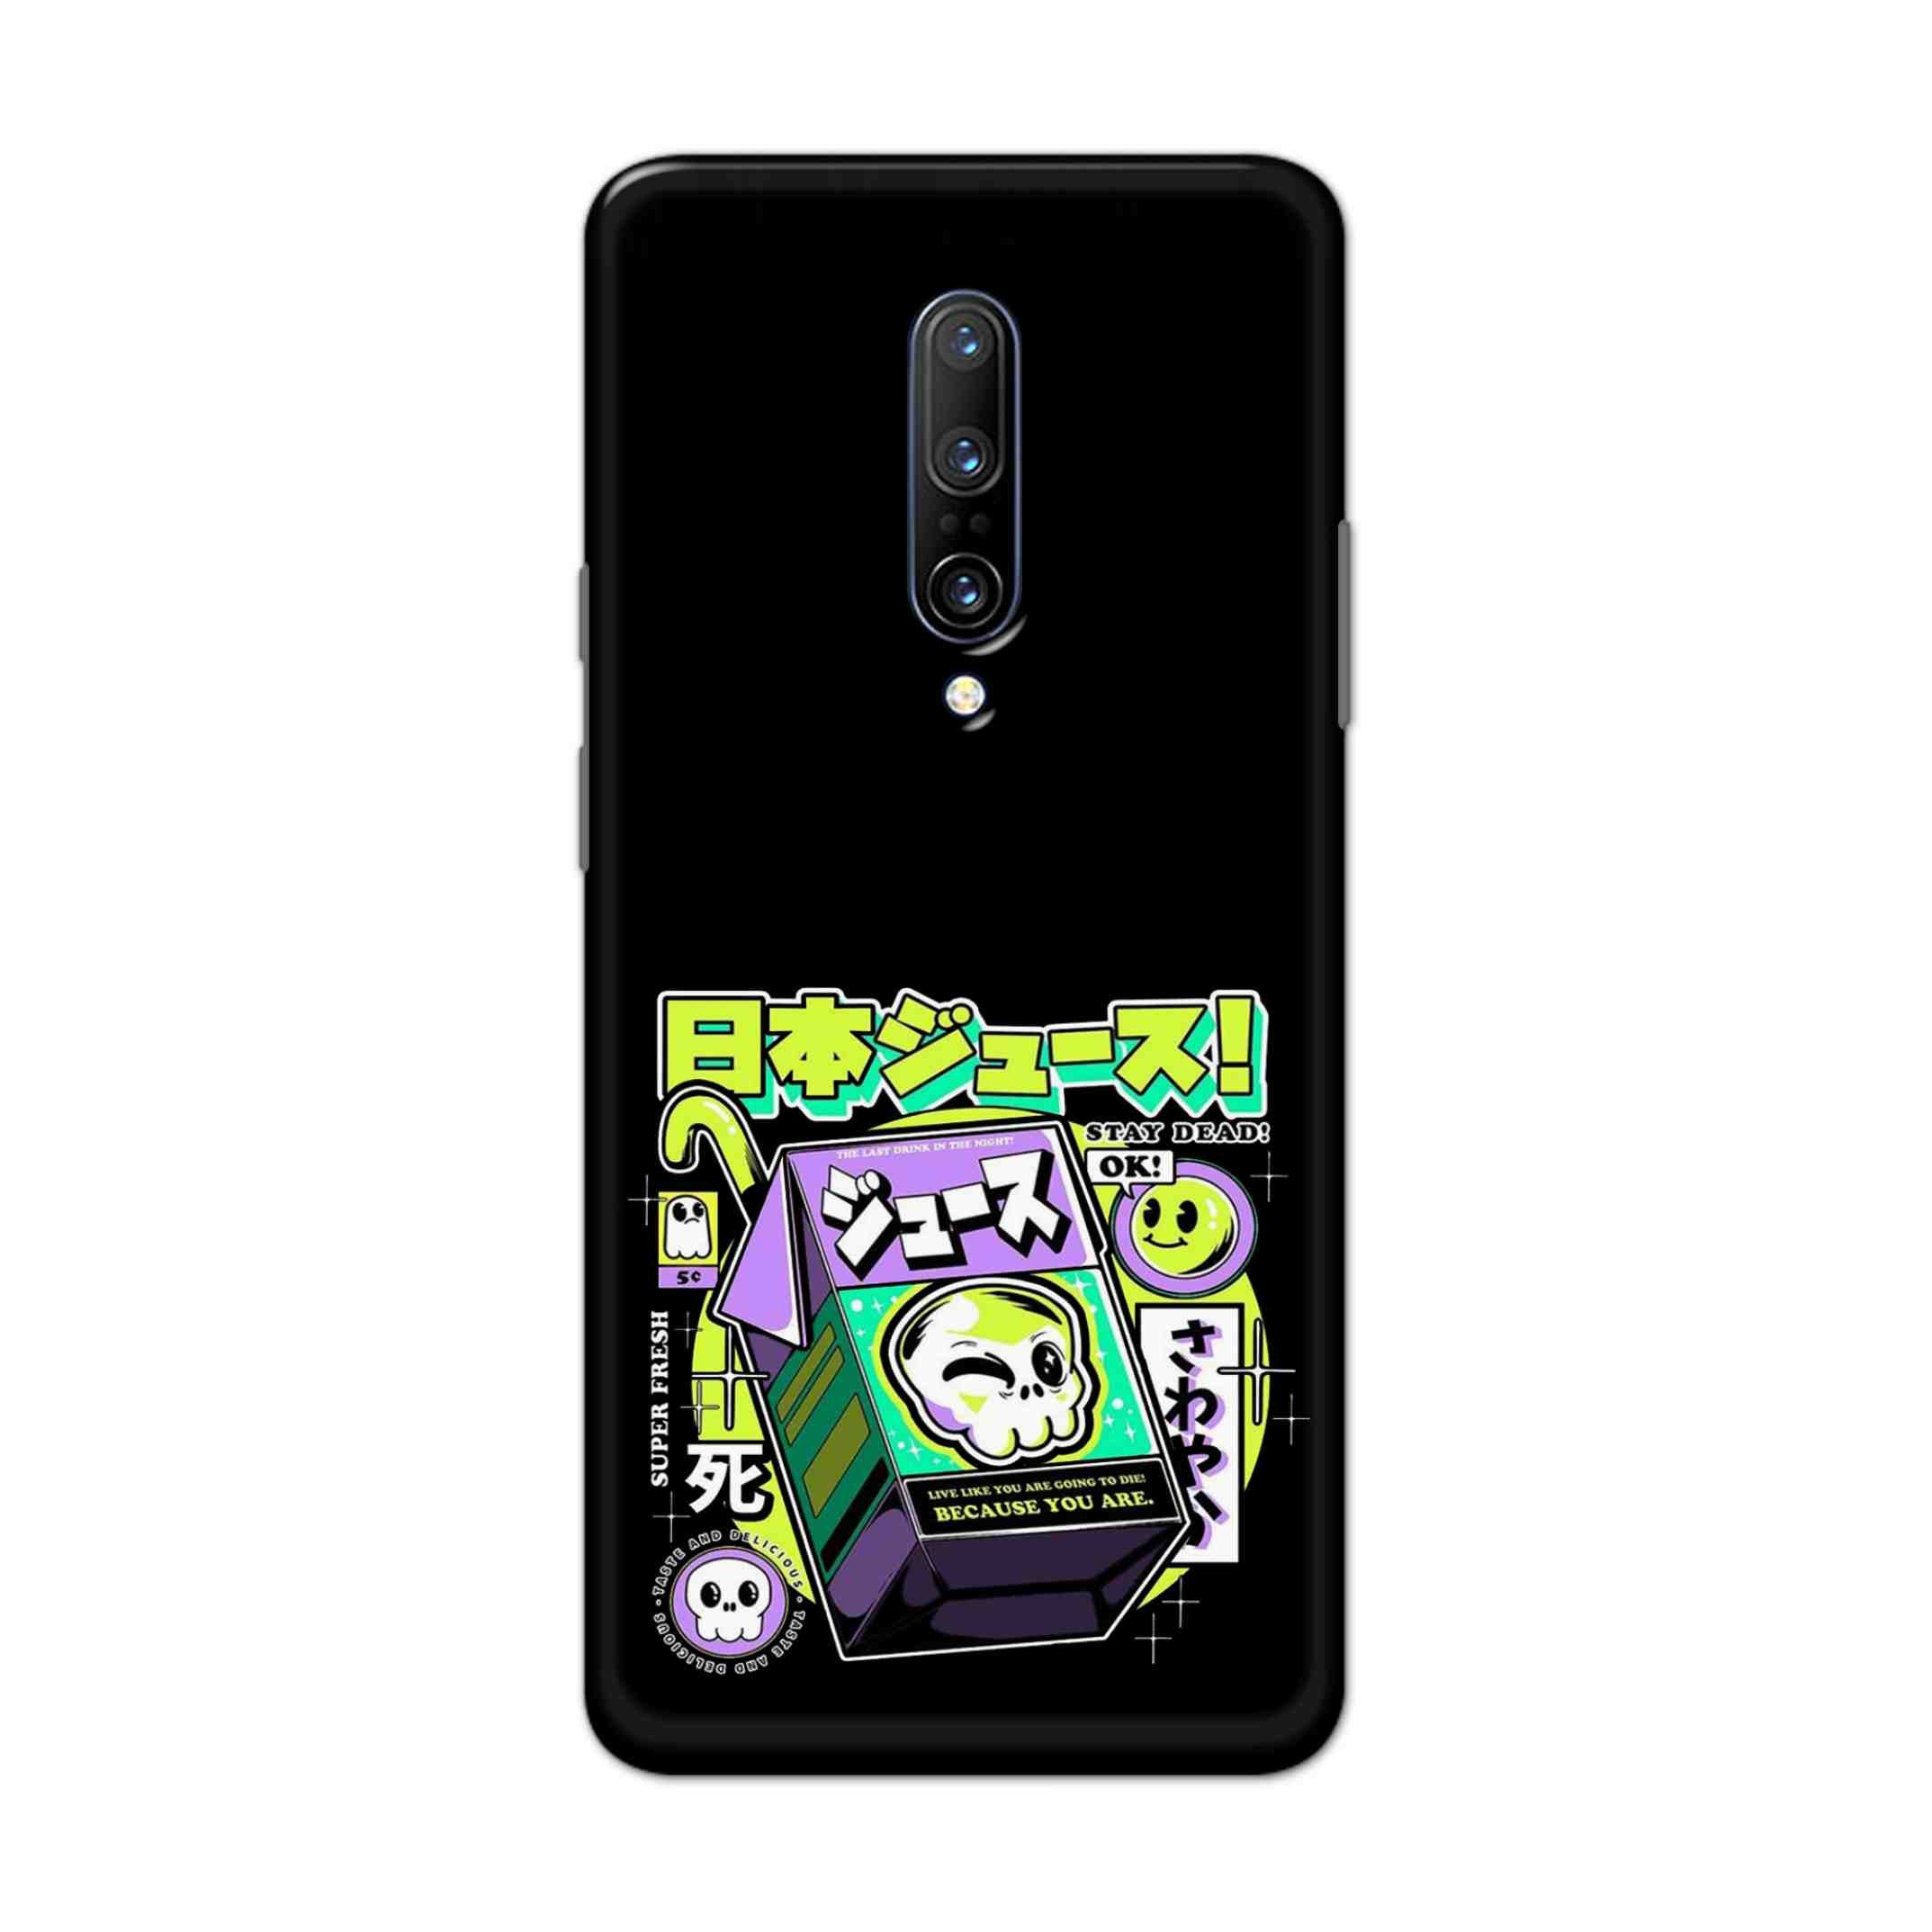 Buy Because You Are Hard Back Mobile Phone Case Cover For OnePlus 7 Pro Online